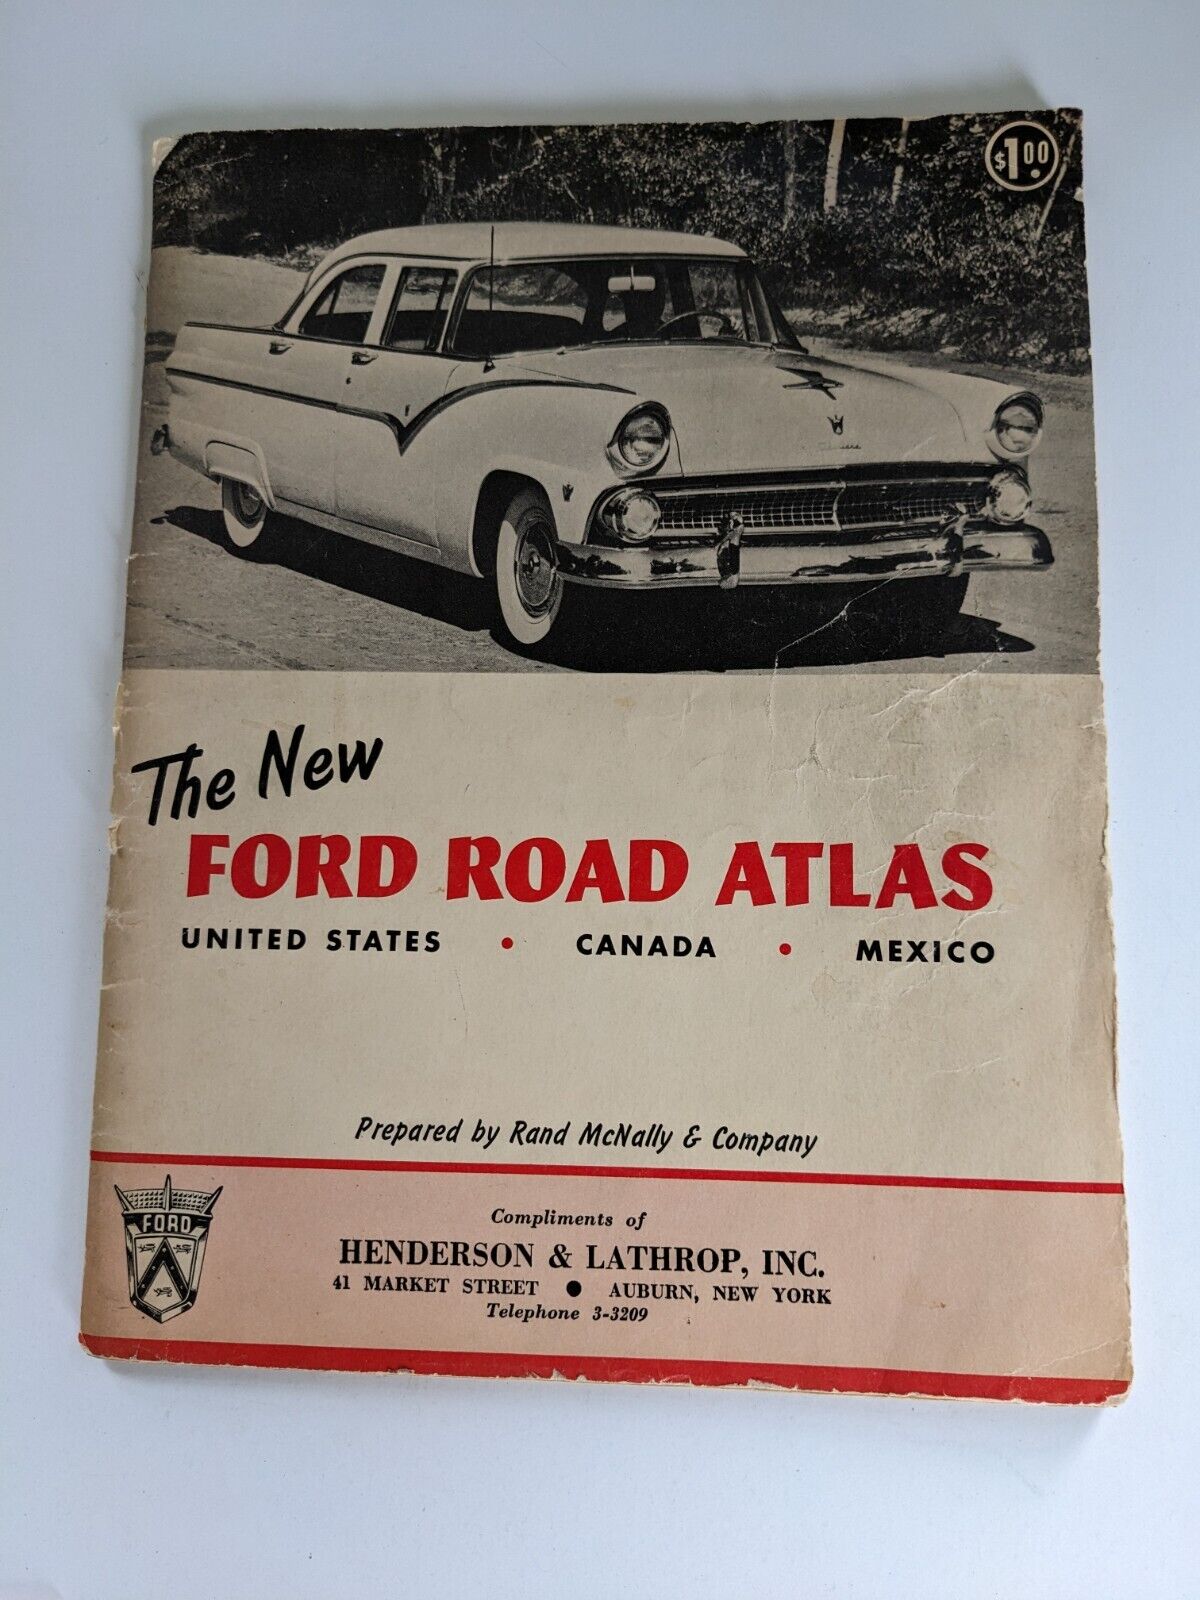 Vintage 1955 Rand McNally & Co. Road Atlas and Radio Guide of The United States